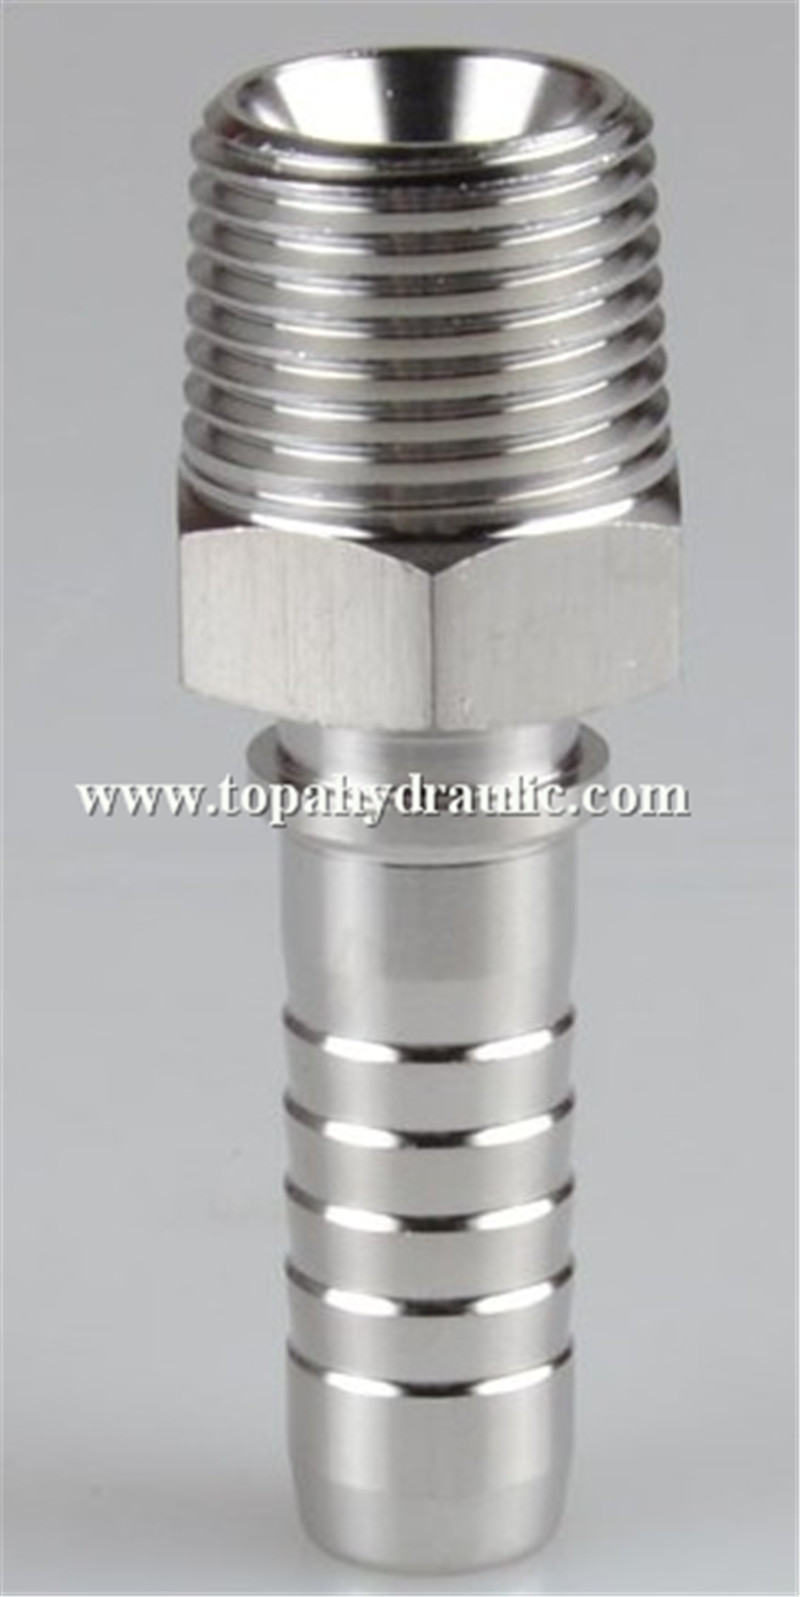 Aeroquip hydraulic to faucet adapter braided hose fittings